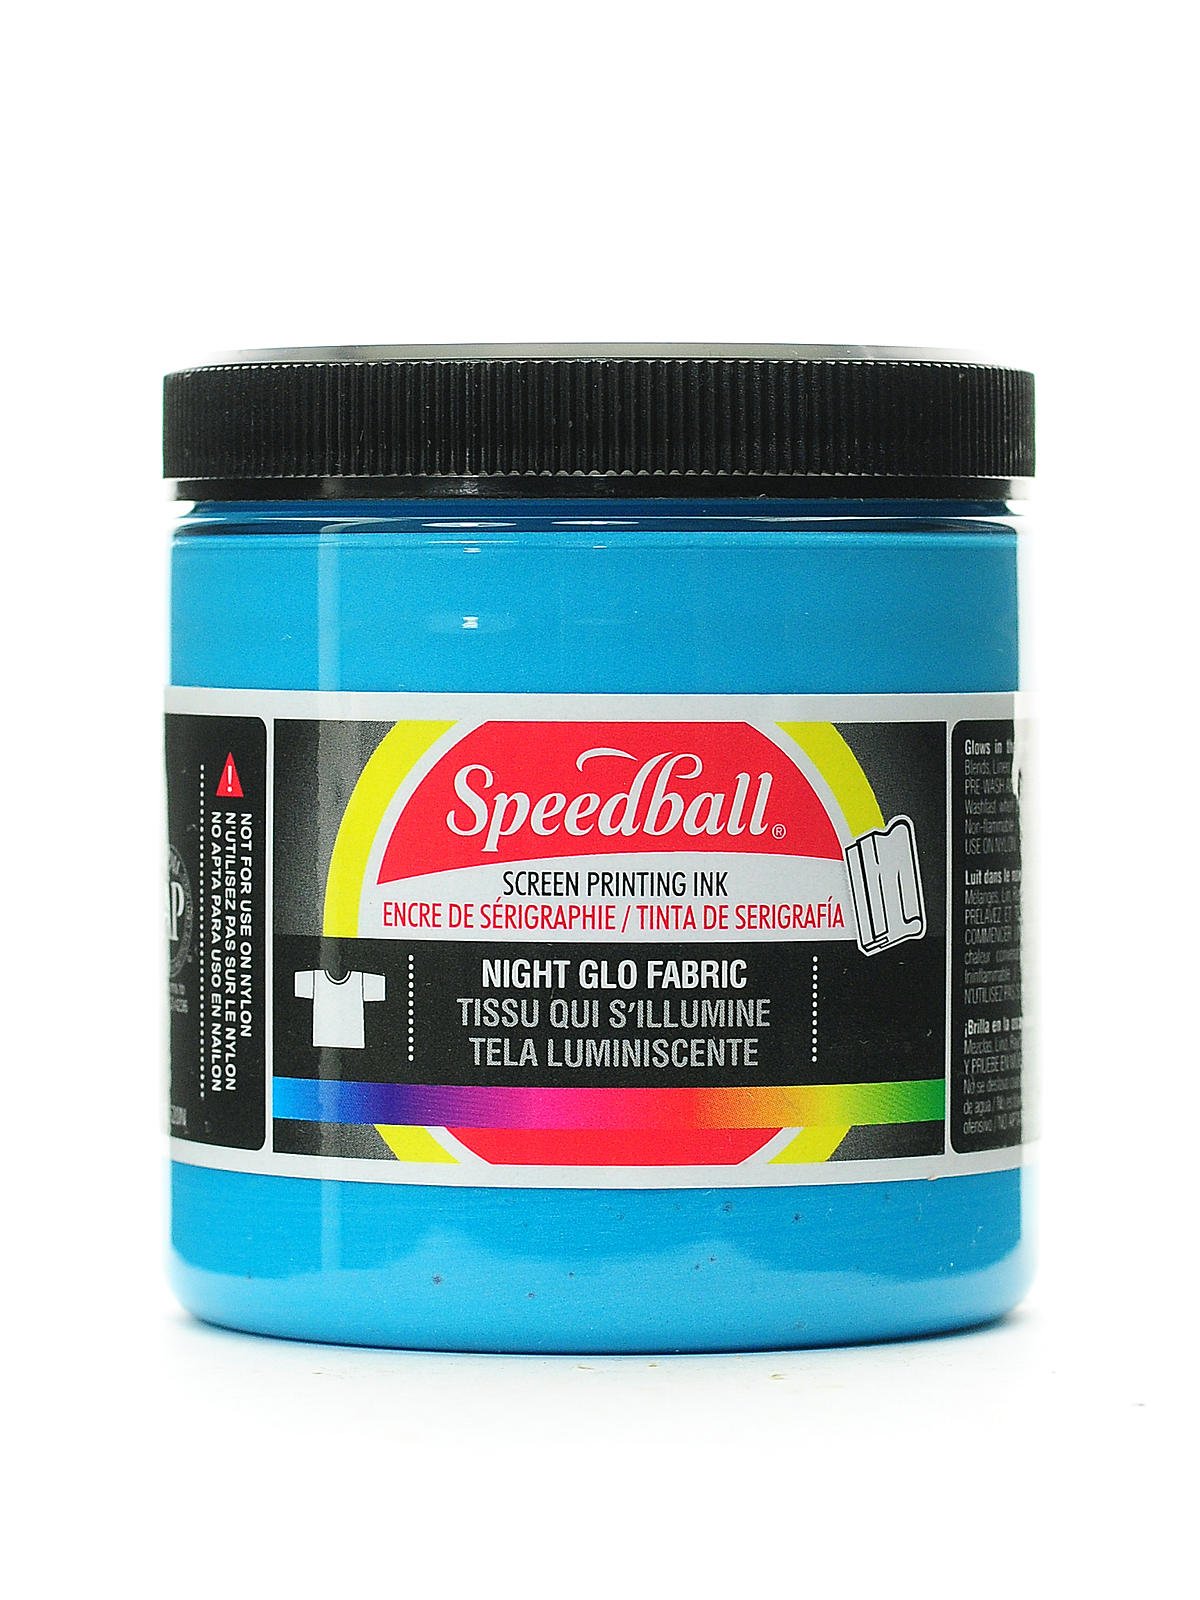 Cotton Candy Speedball Fabric Screen Printing Ink